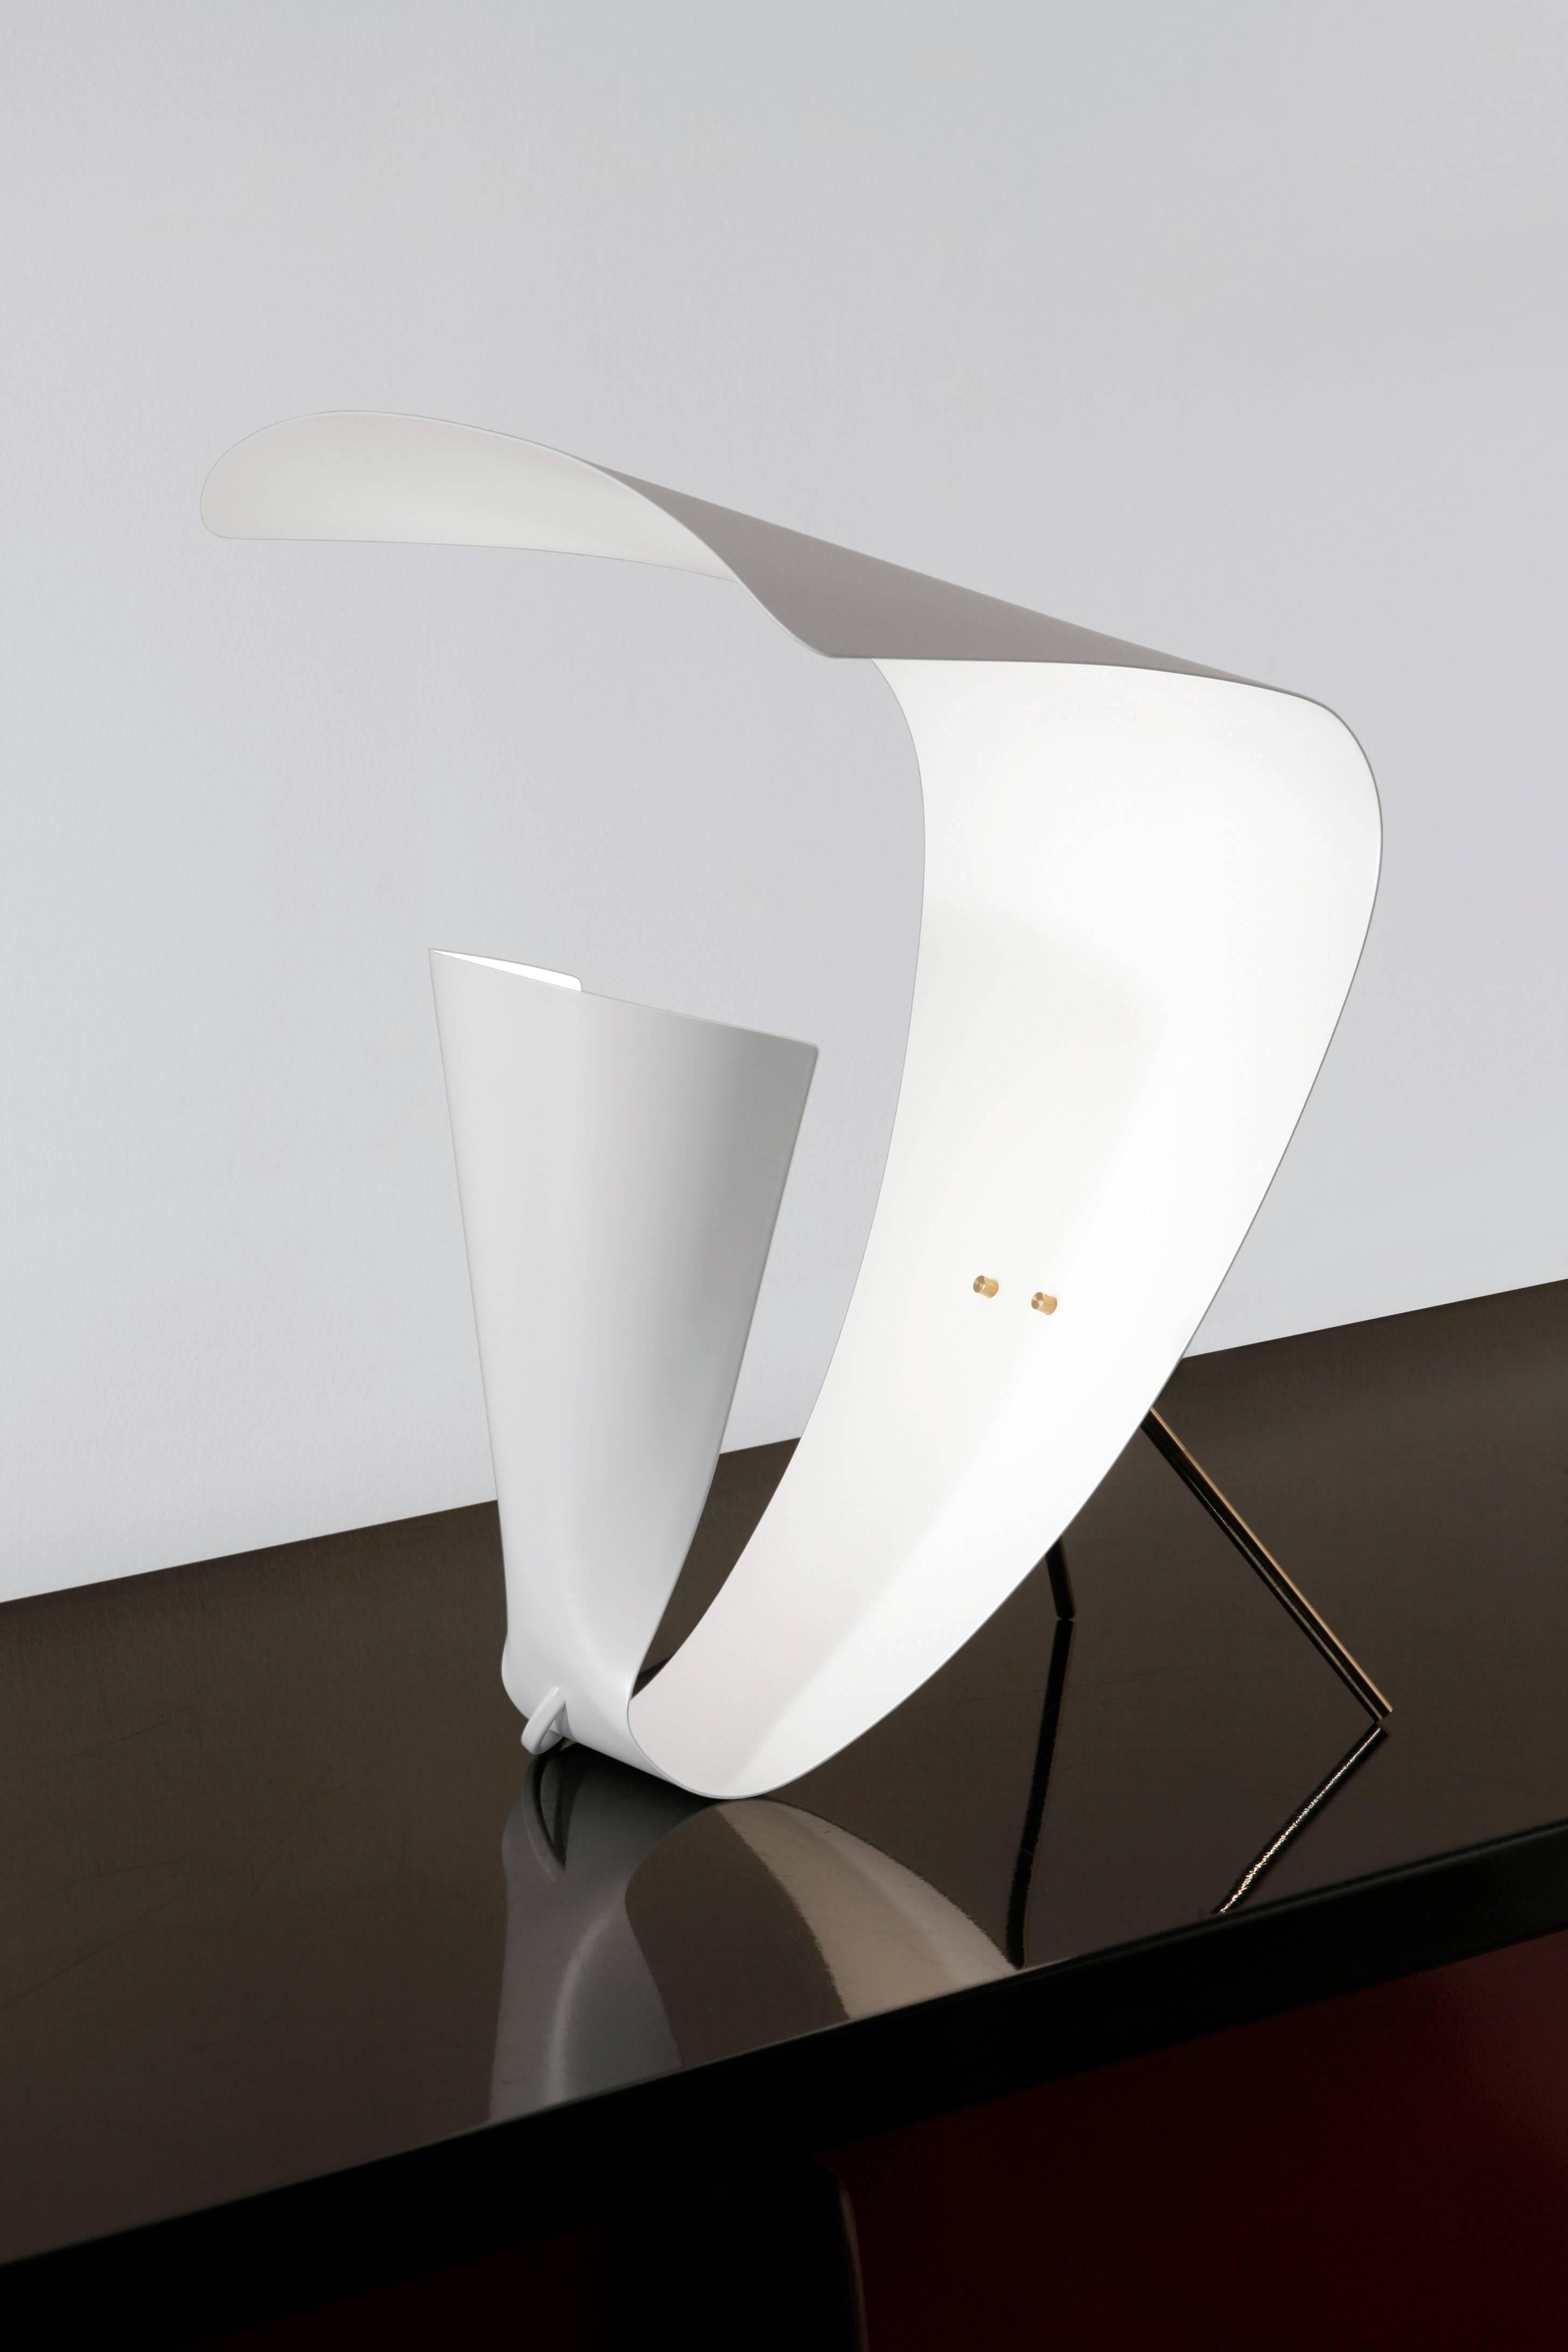 Michel Buffet Mid-Century Modern white B201 desk lamp designed in 1953.

The production of this re-edition lamps, wall lights and floor lamps are manufactured using craftsman’s techniques with the same materials and techniques as the first models.